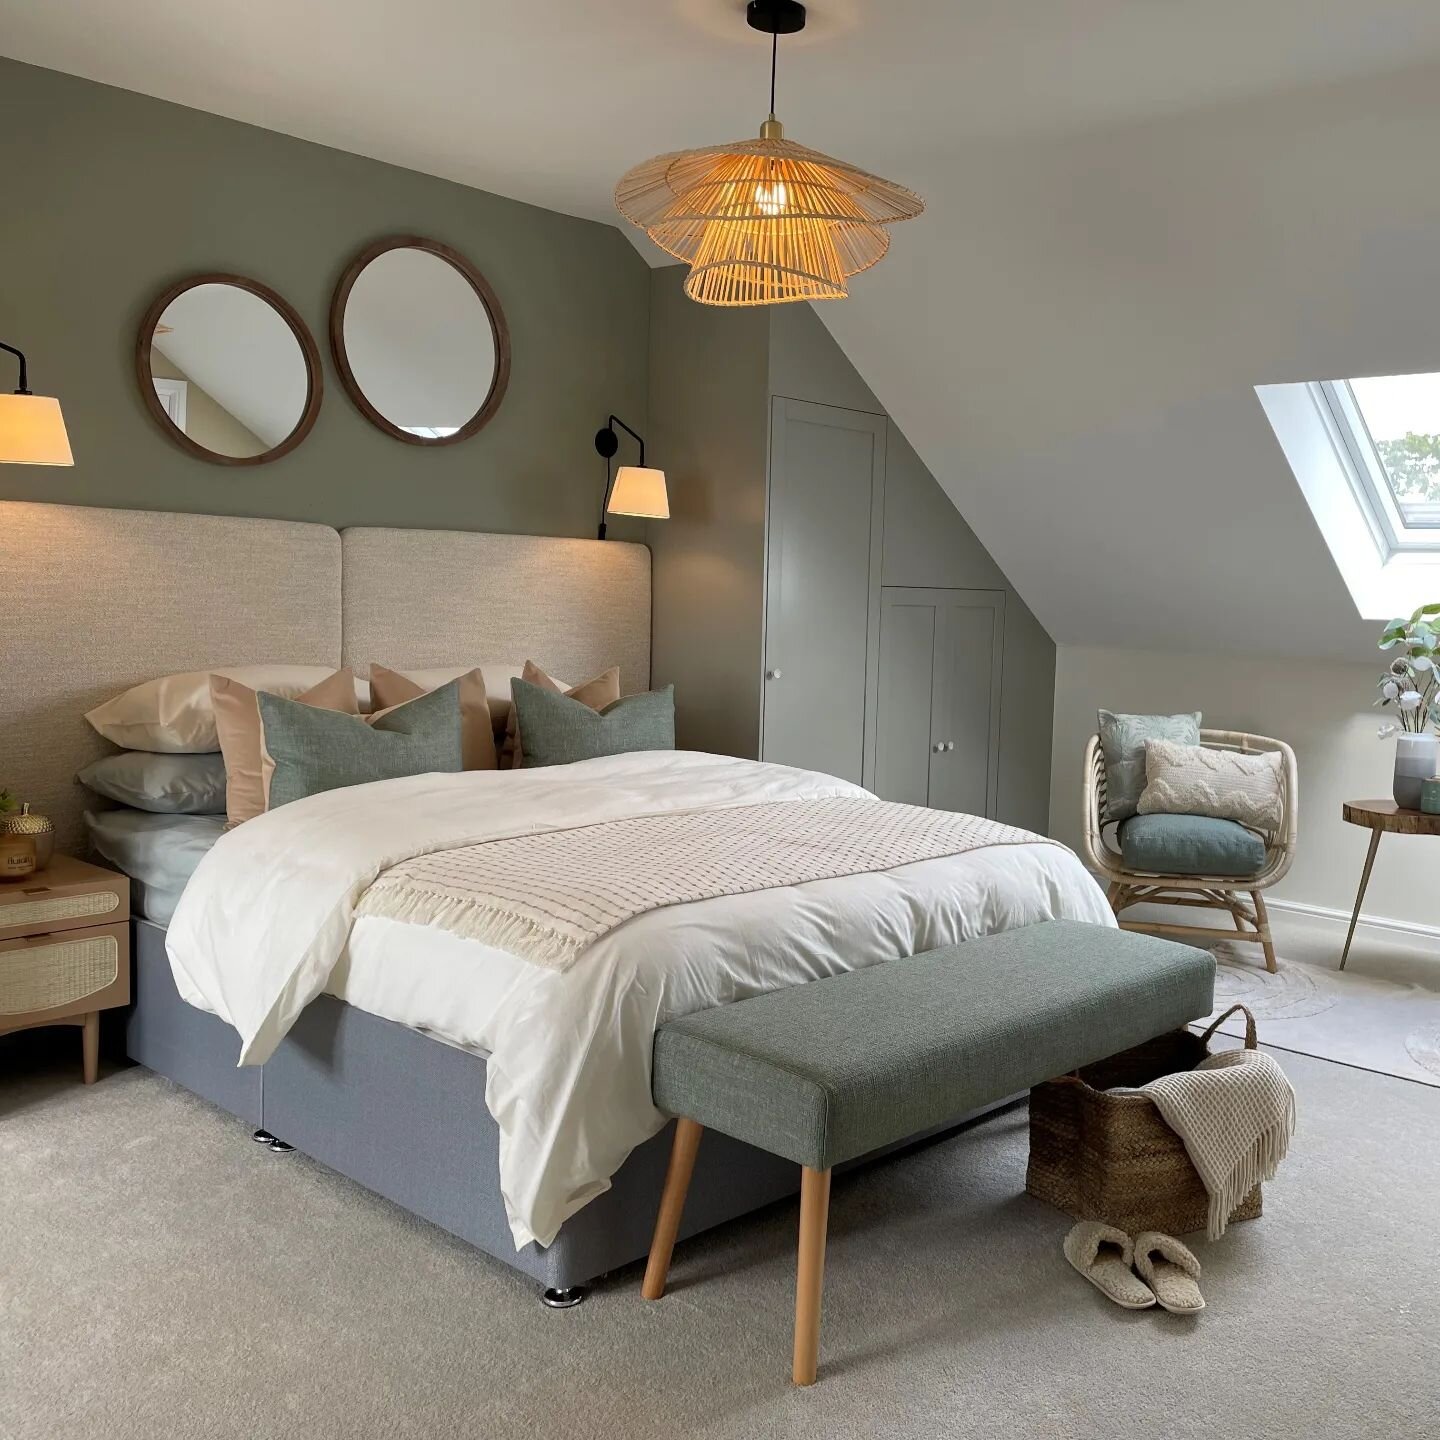 Sage green &amp; natural textures create a calm and serene space in this Master bedroom suite.
#interiors #interiordesign #interiorstyling #masterbedroomdesign #masterbedroom #bedroomdecor #bedroominspo #homeinspo #homedecor #newhome #showhome